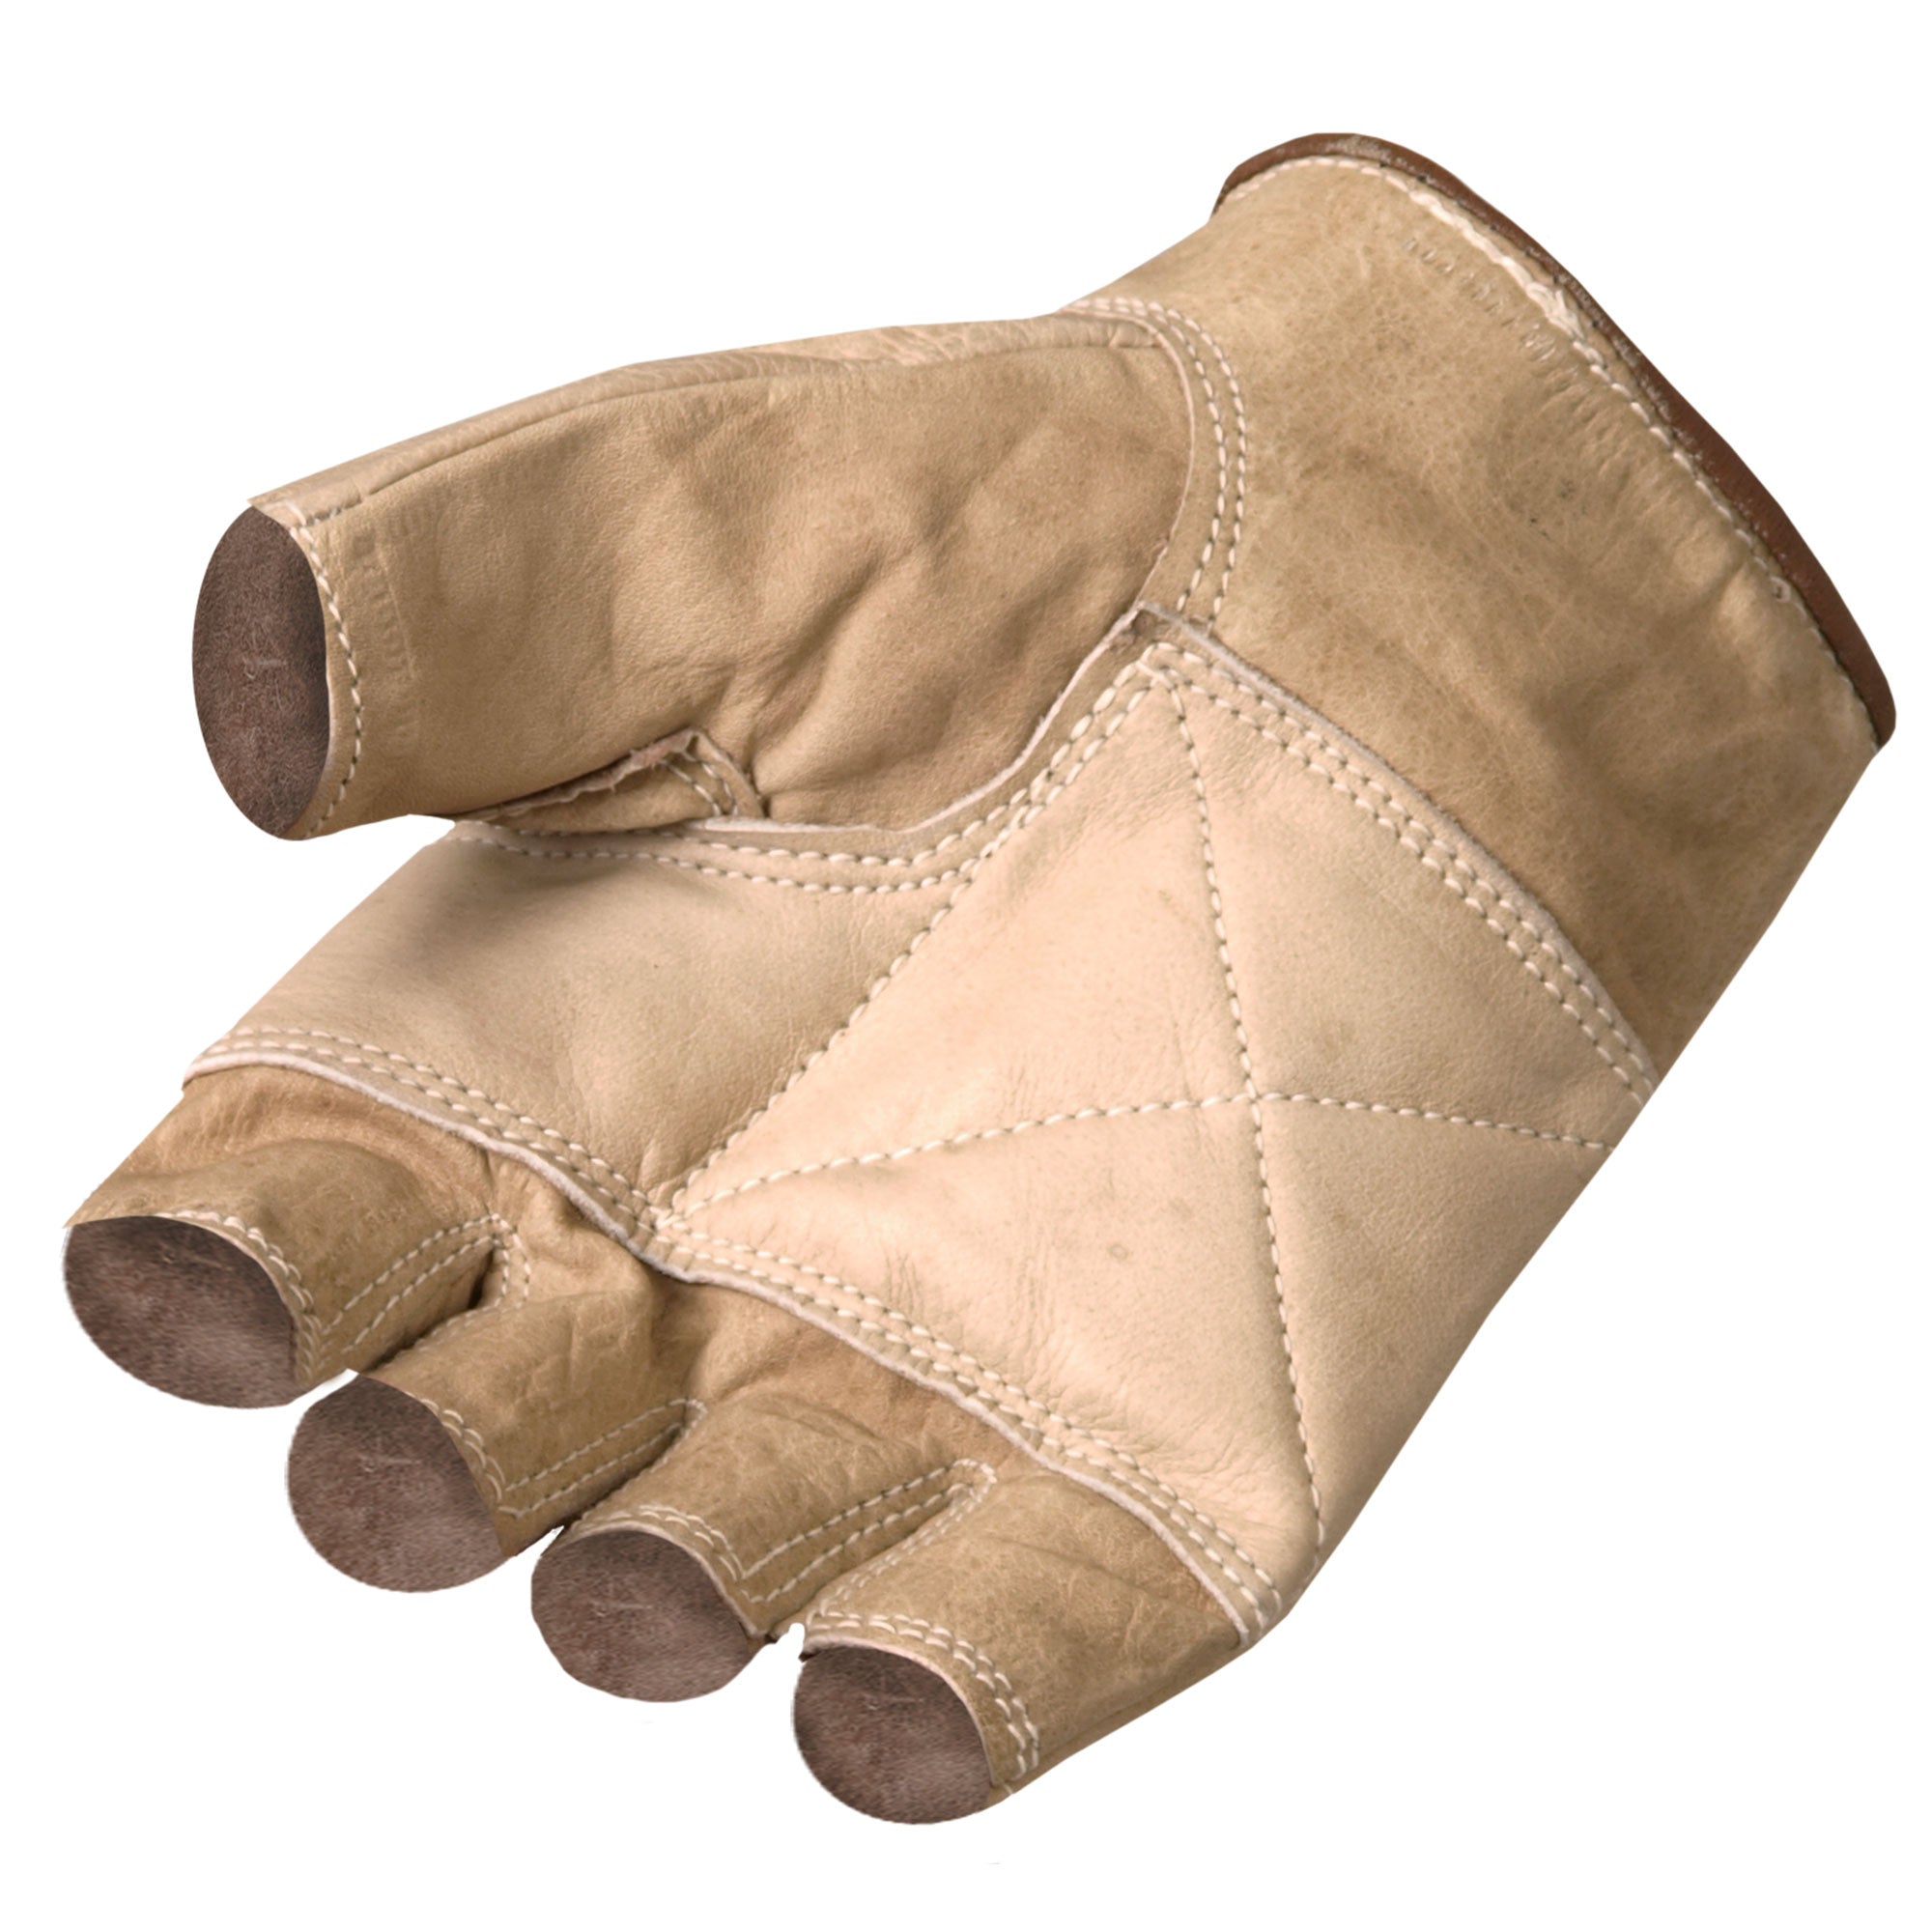 LEATHER FINGERLESS GLOVES that is popular among professional